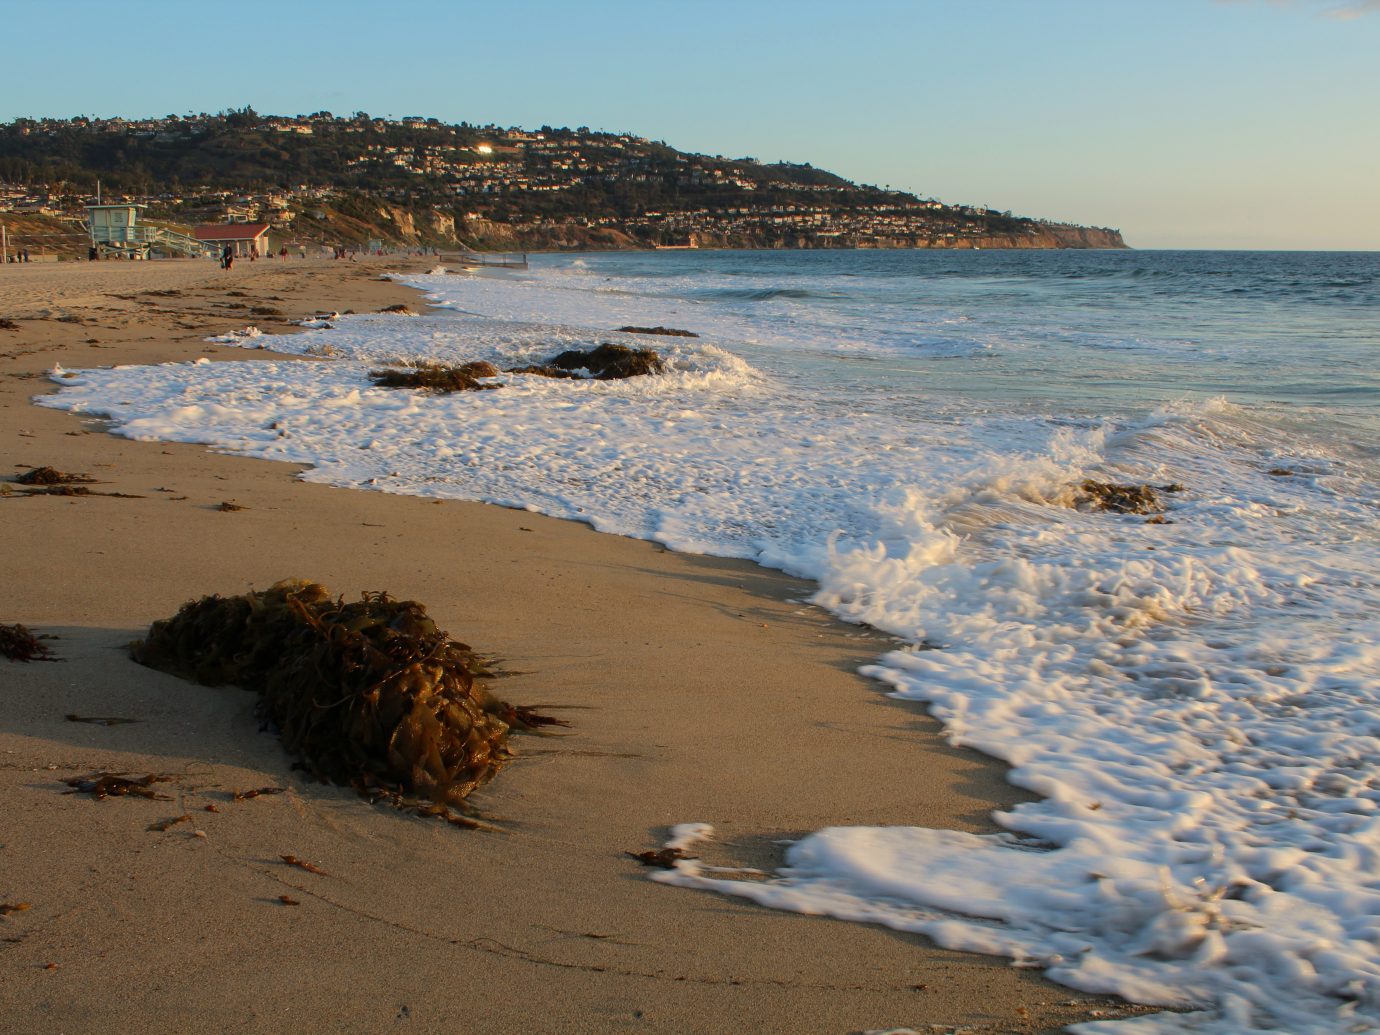 The scenic shoreline of Torrance Beach, with the Palos Verdes peninsula in the background.